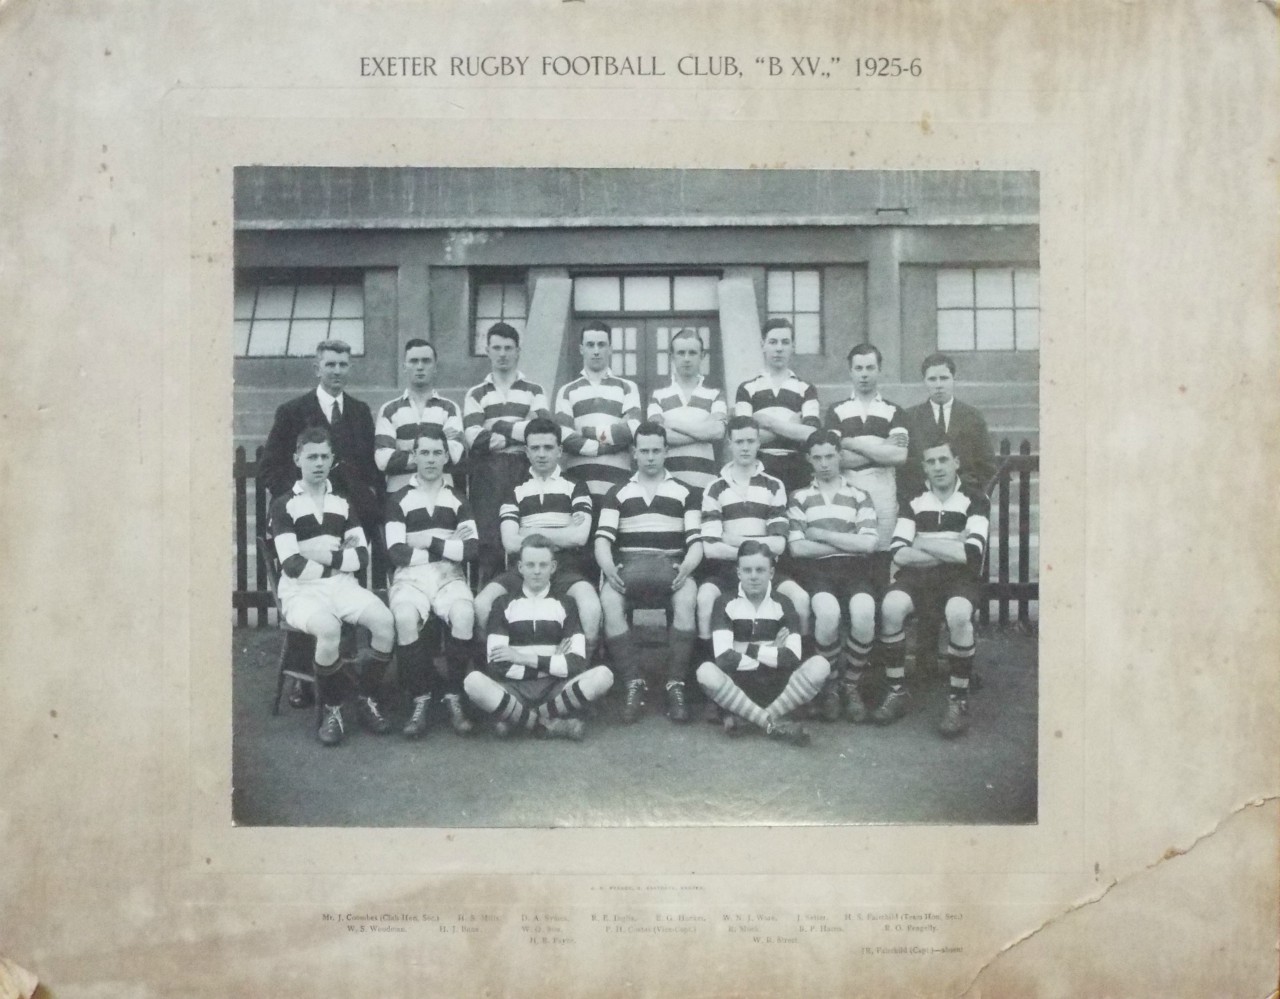 Photograph - Exeter Rugby Football Club, 